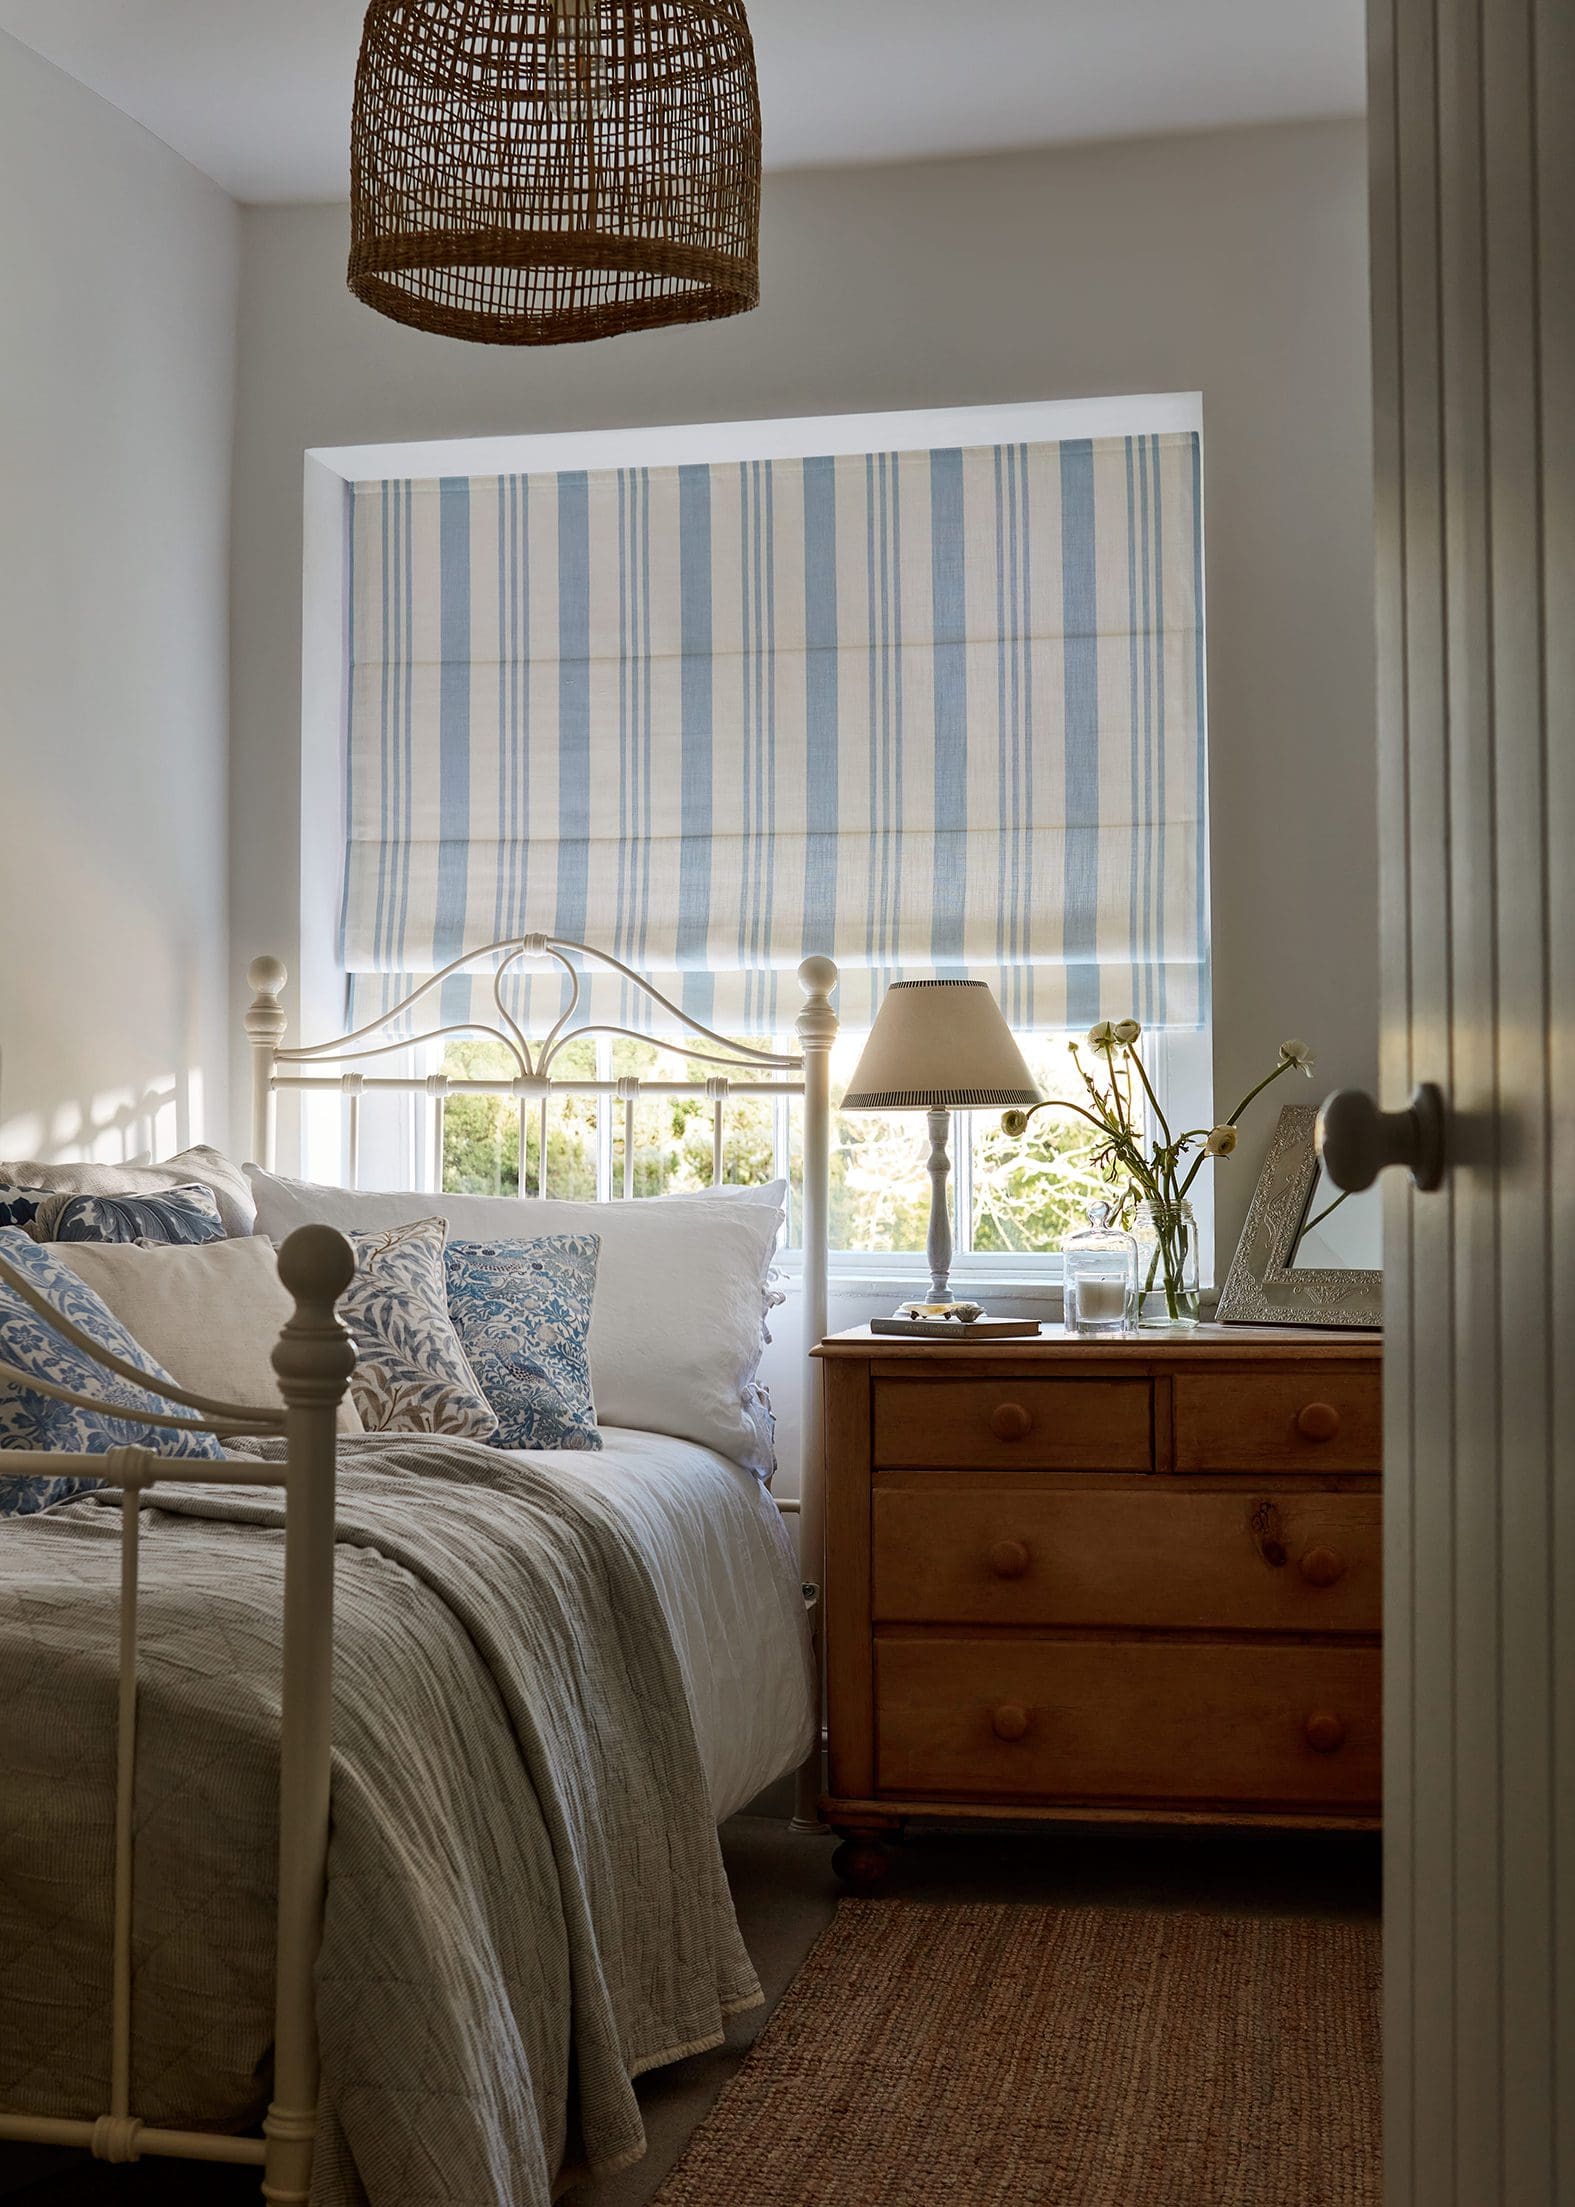 how to clean roman blinds